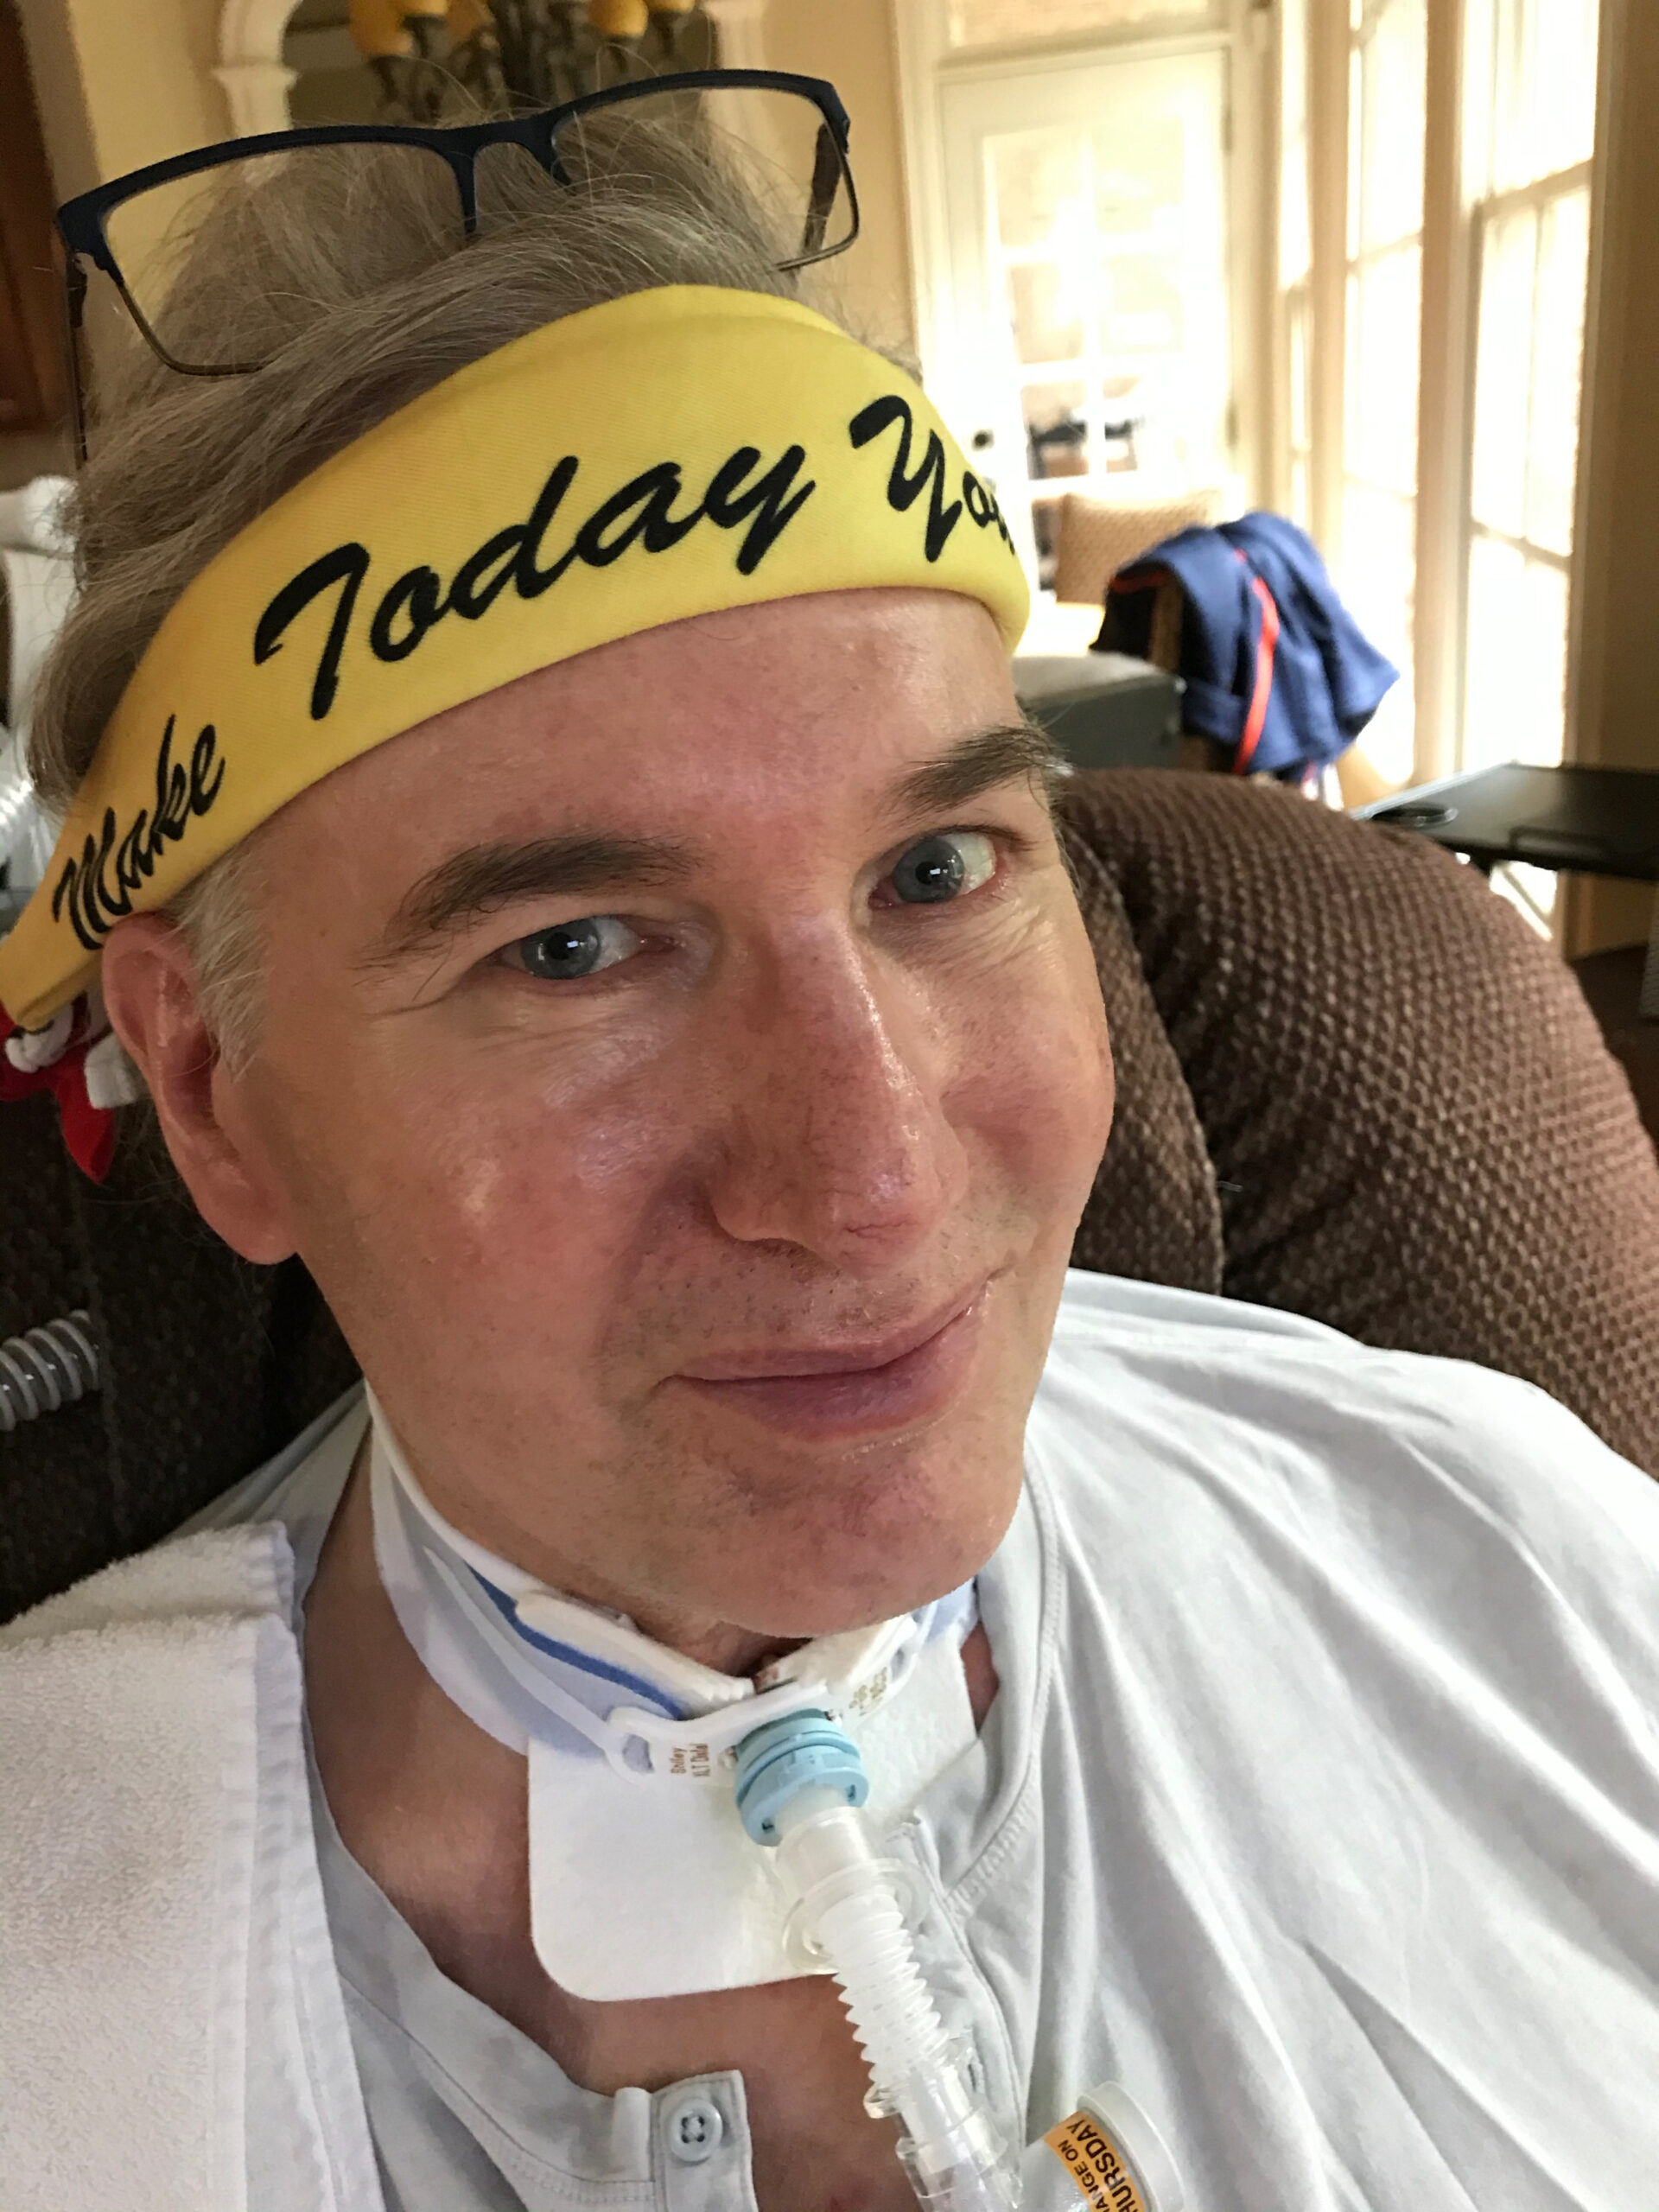 Gary Godfrey in a Make Today Your Best Day headband